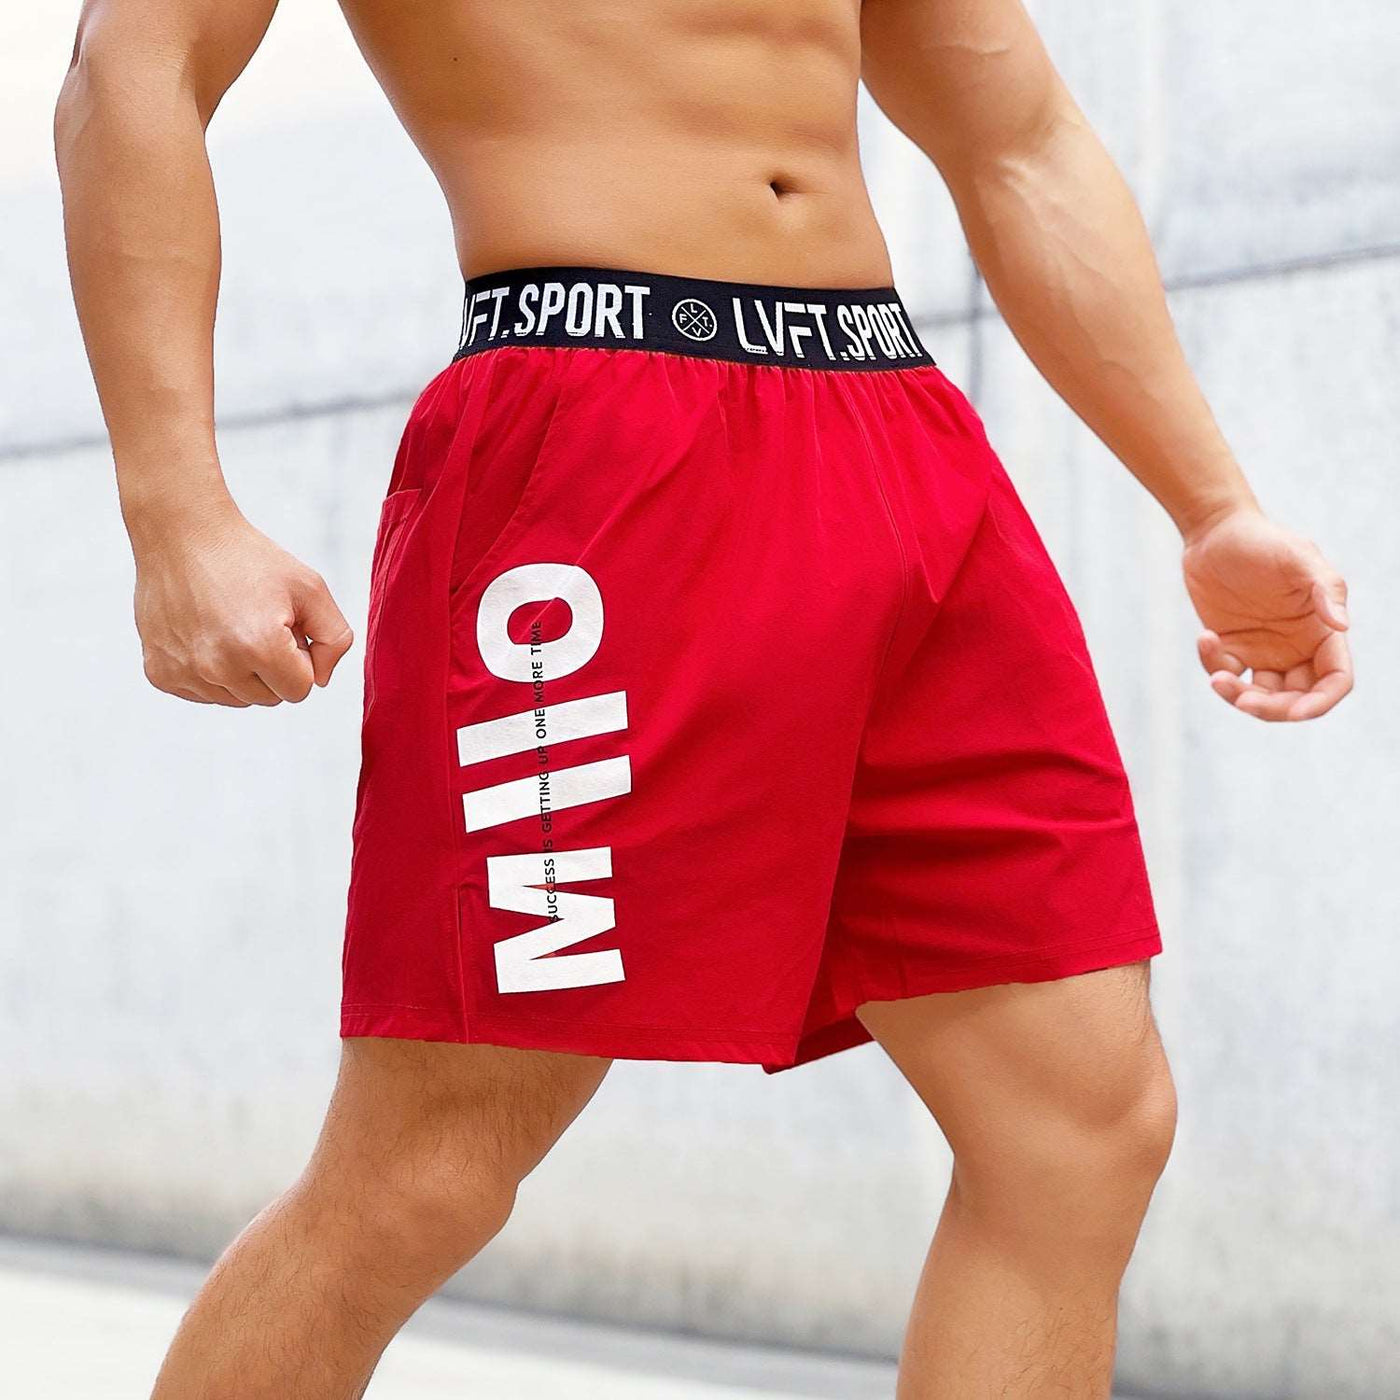 American Workout Men's Shorts Sports Basketball Outdoor Exercise Loose Breathable Quick-drying Thin Elastic Pants - Carvan Mart